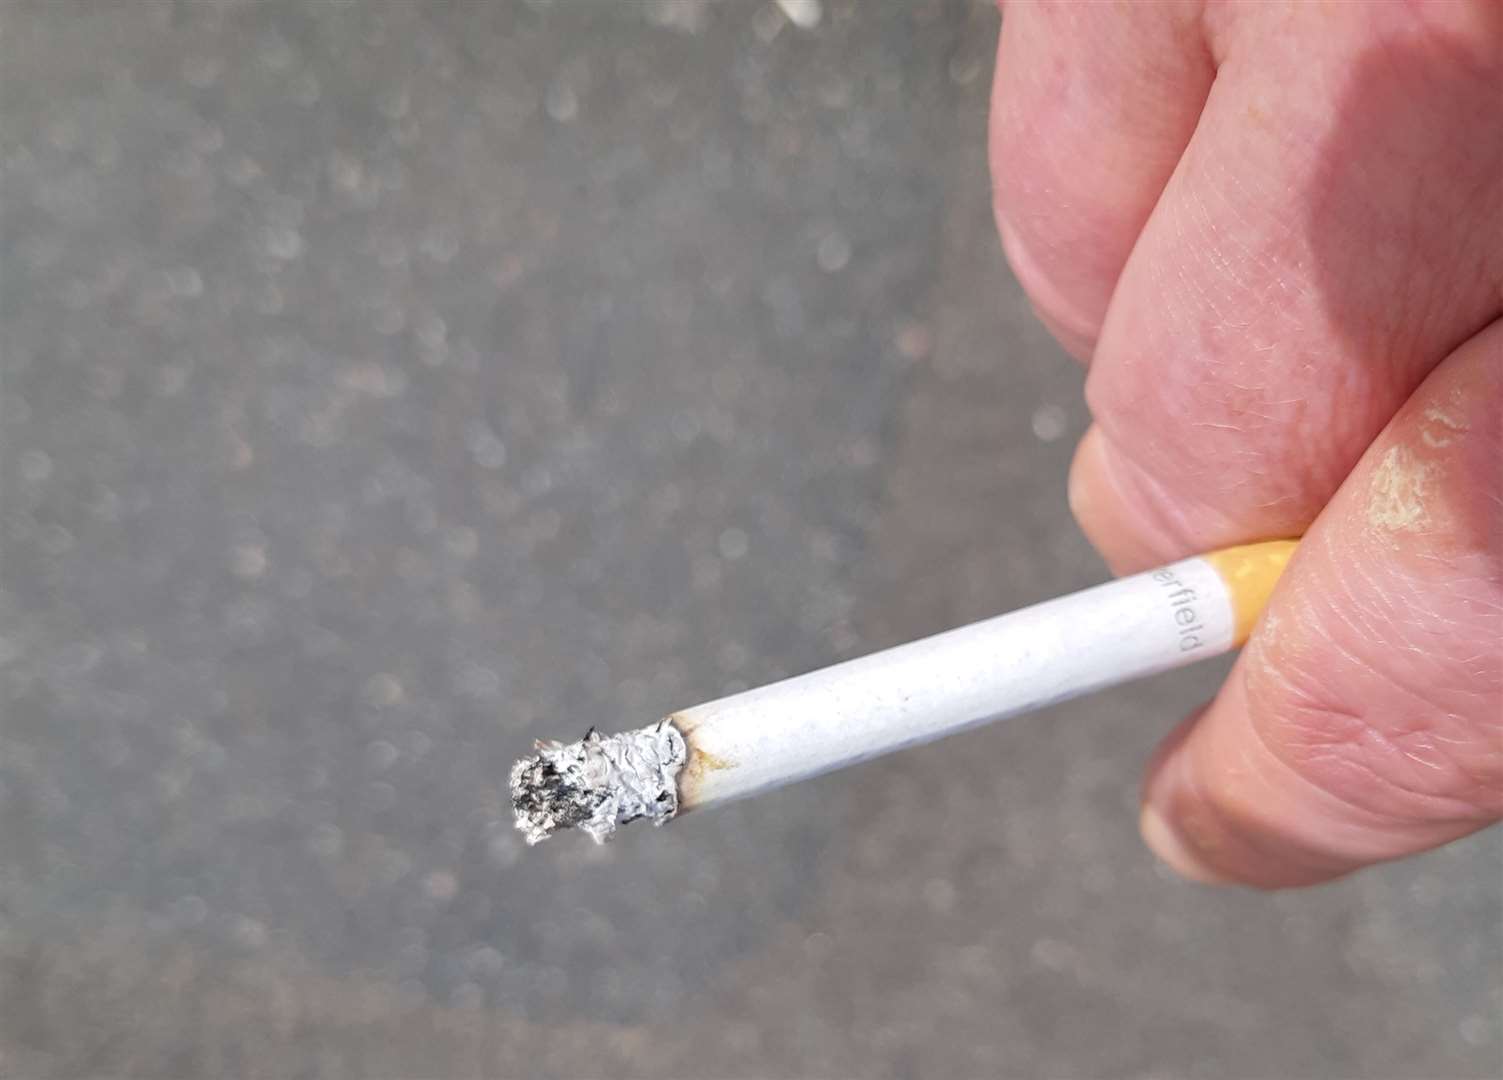 The ballot is also to get smokers to dispose of their cigarette ends responsibly. Picture: Sam Lennon